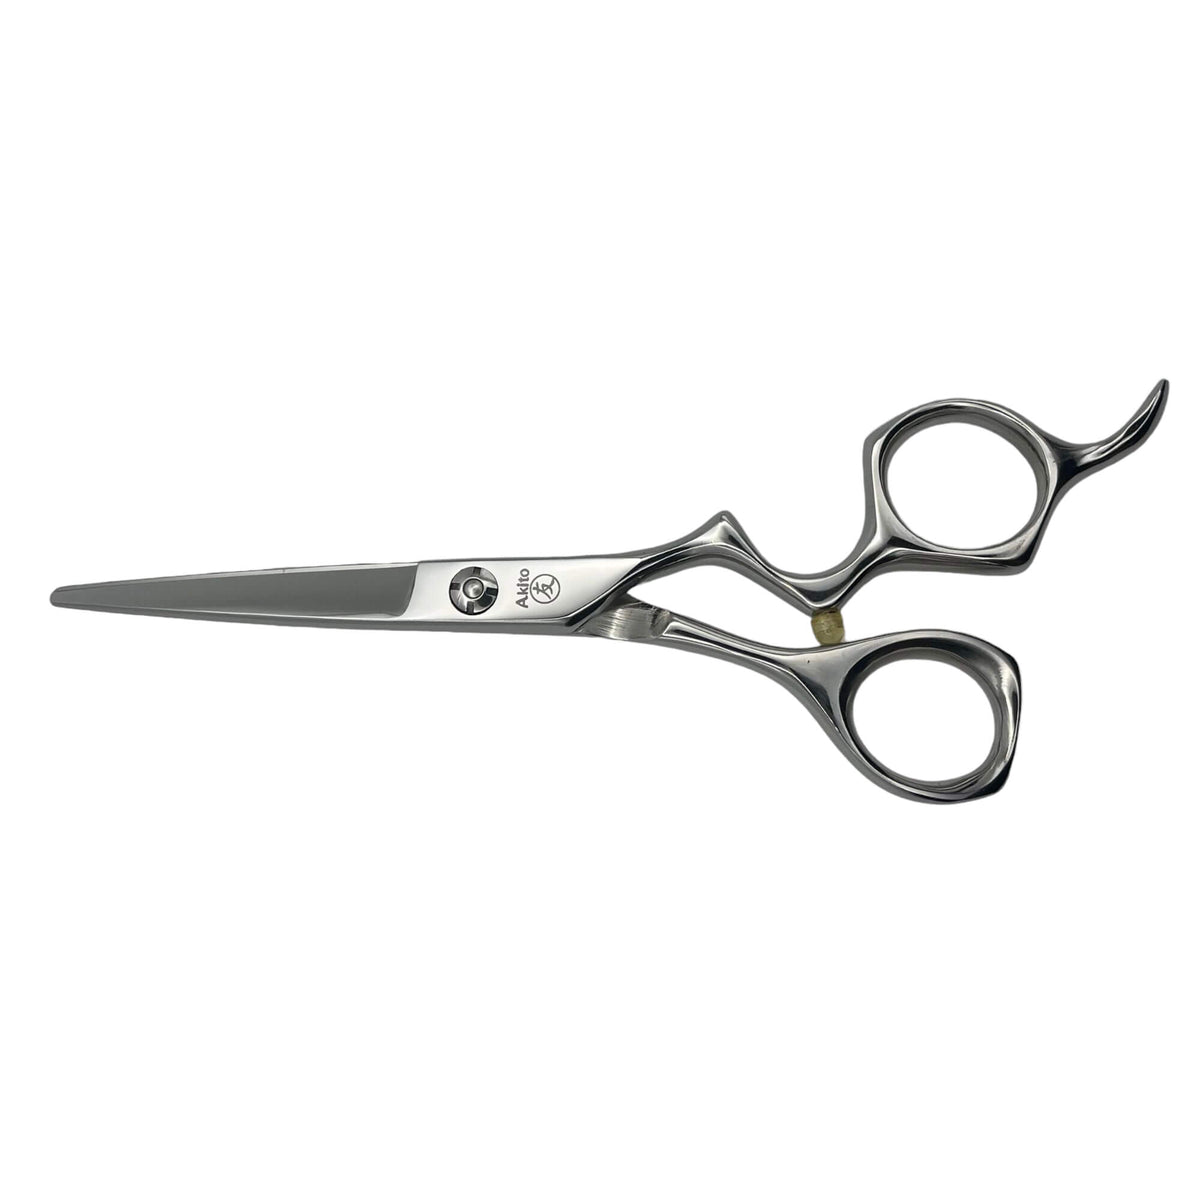 X 8 Silver 5.75 Hairdressing Scissors side angle